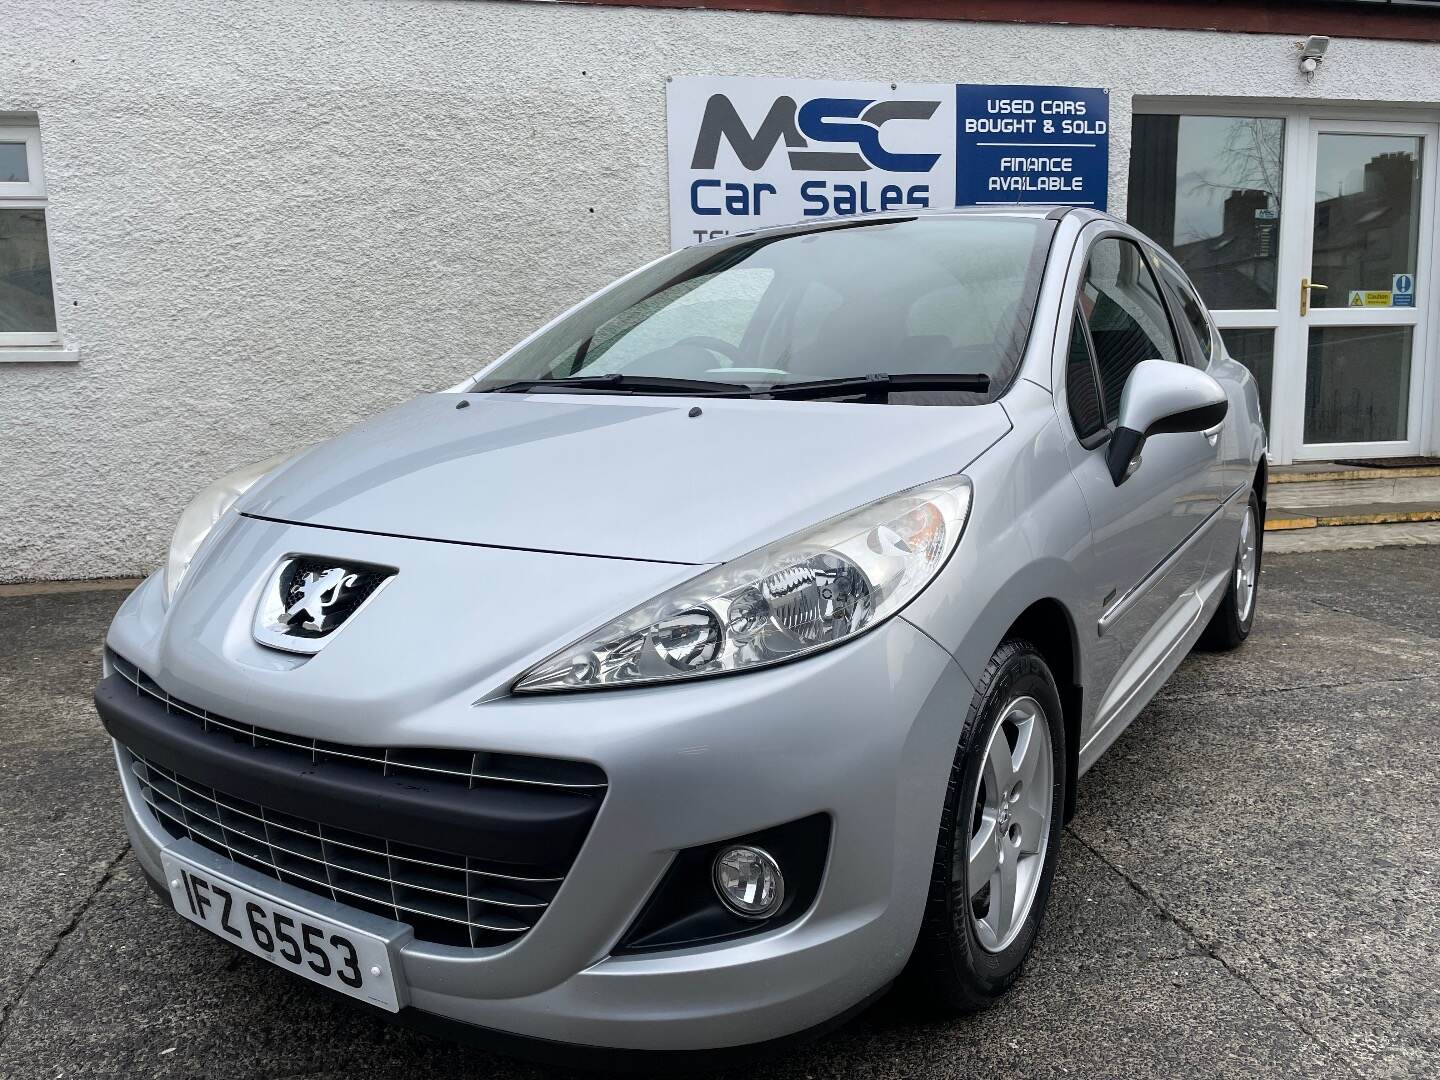 Peugeot 207 HATCHBACK SPECIAL EDITIONS in Down